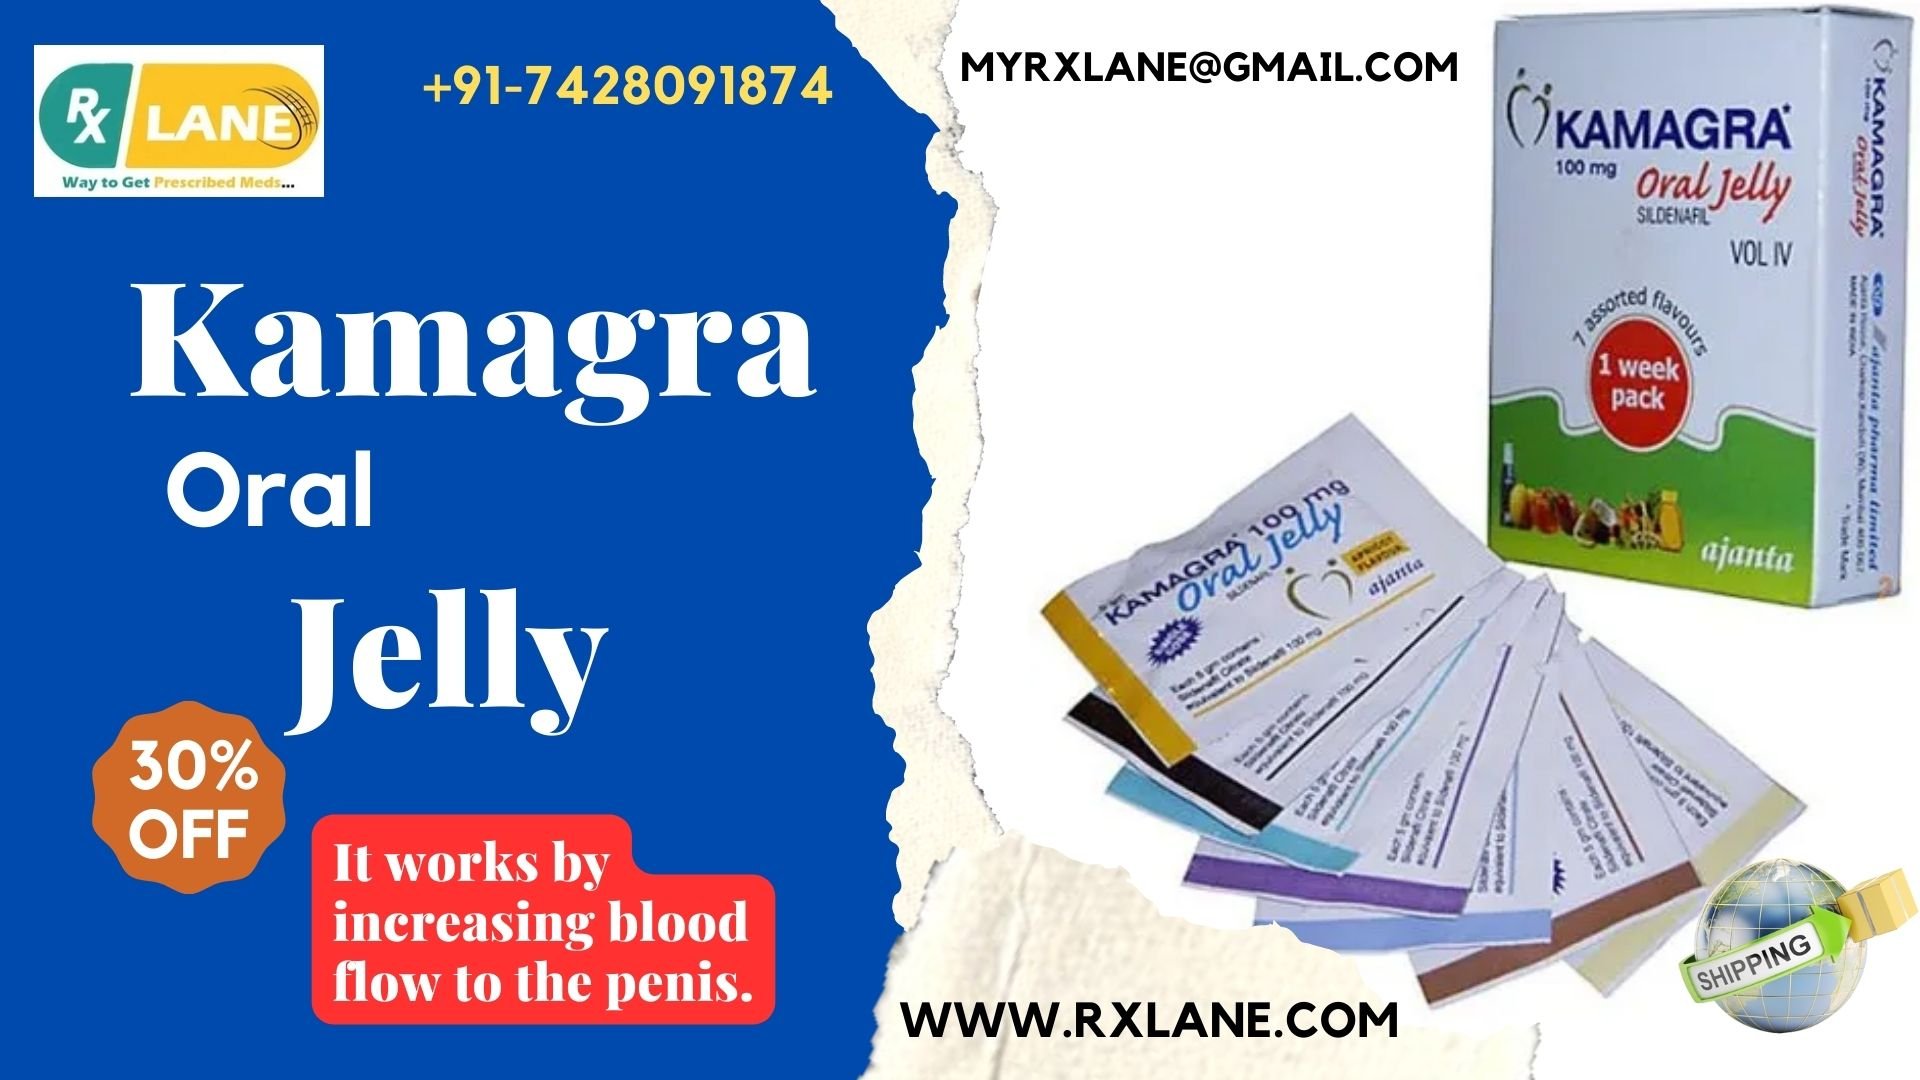 Kamagra Oral Jelly Cost Philippines